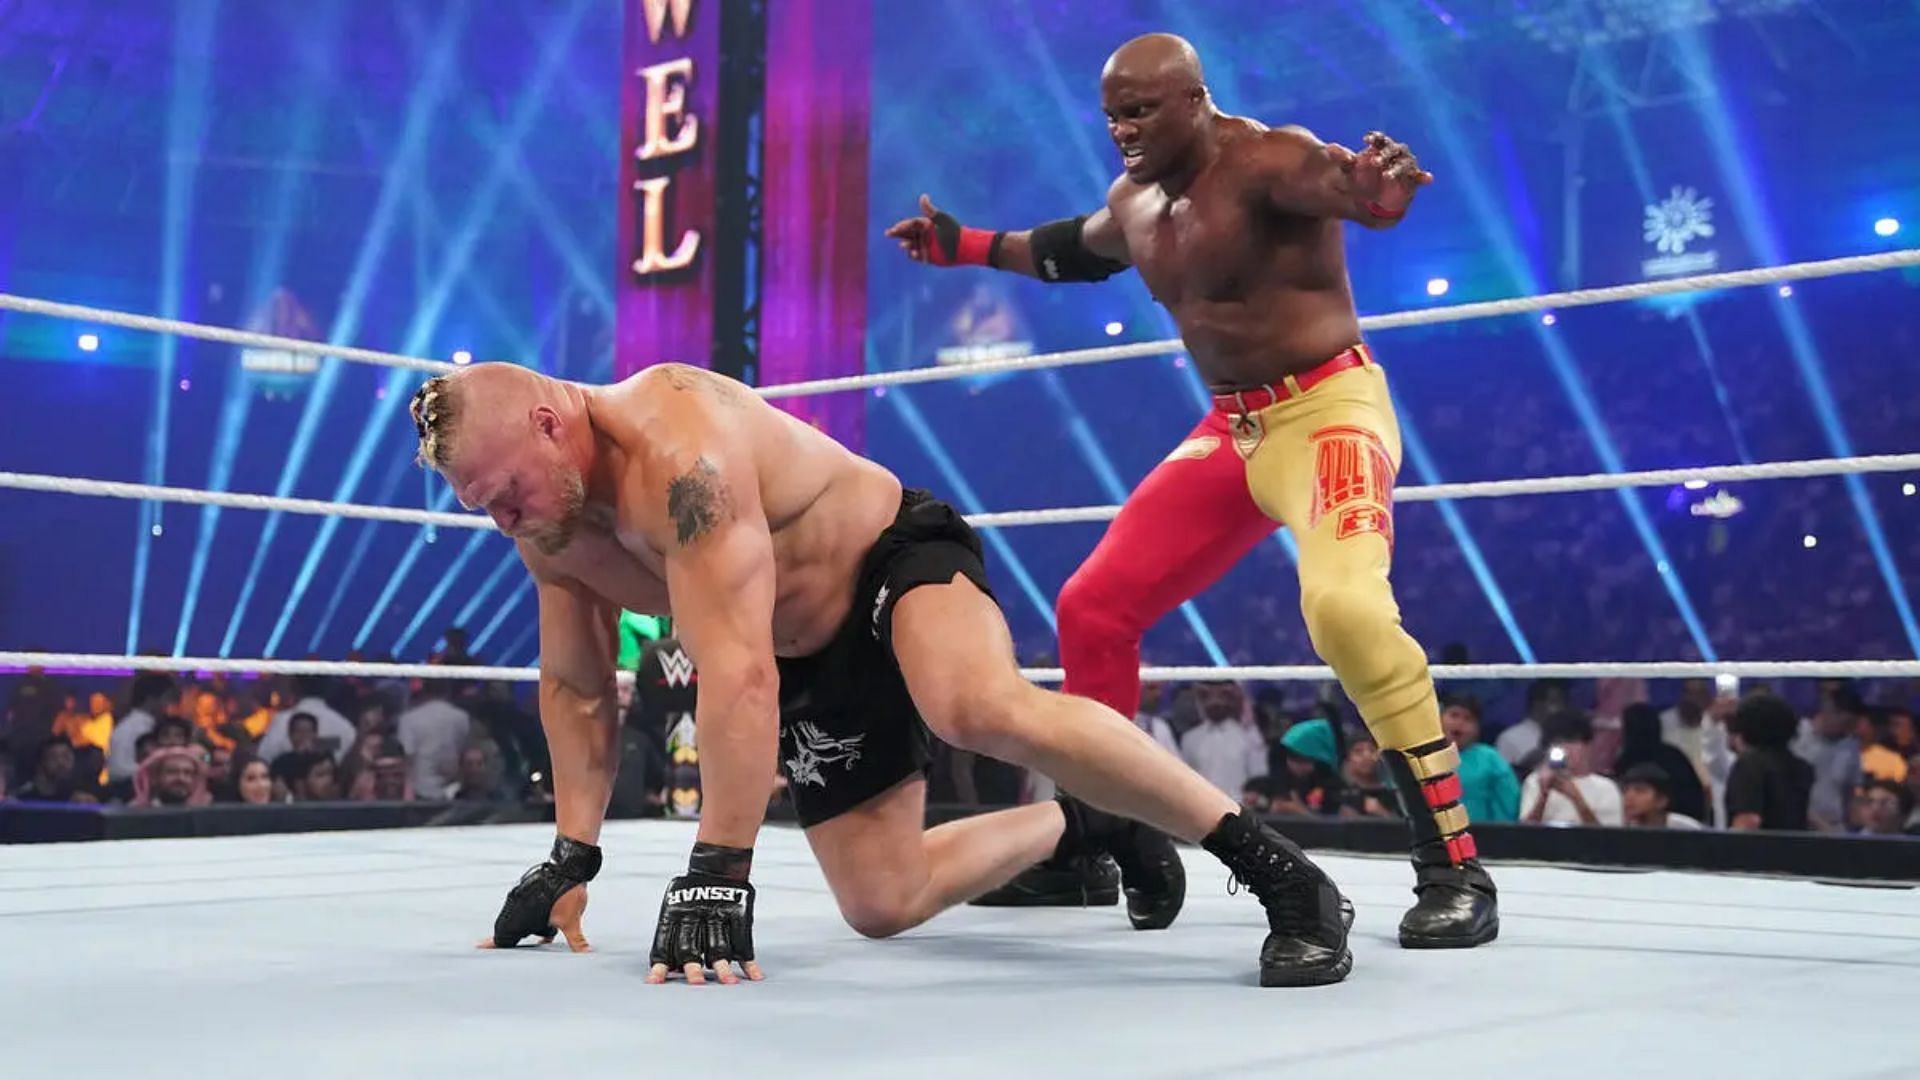 Brock Lesnar defeated Bobby Lashley at WWE Crown Jewel 2022.